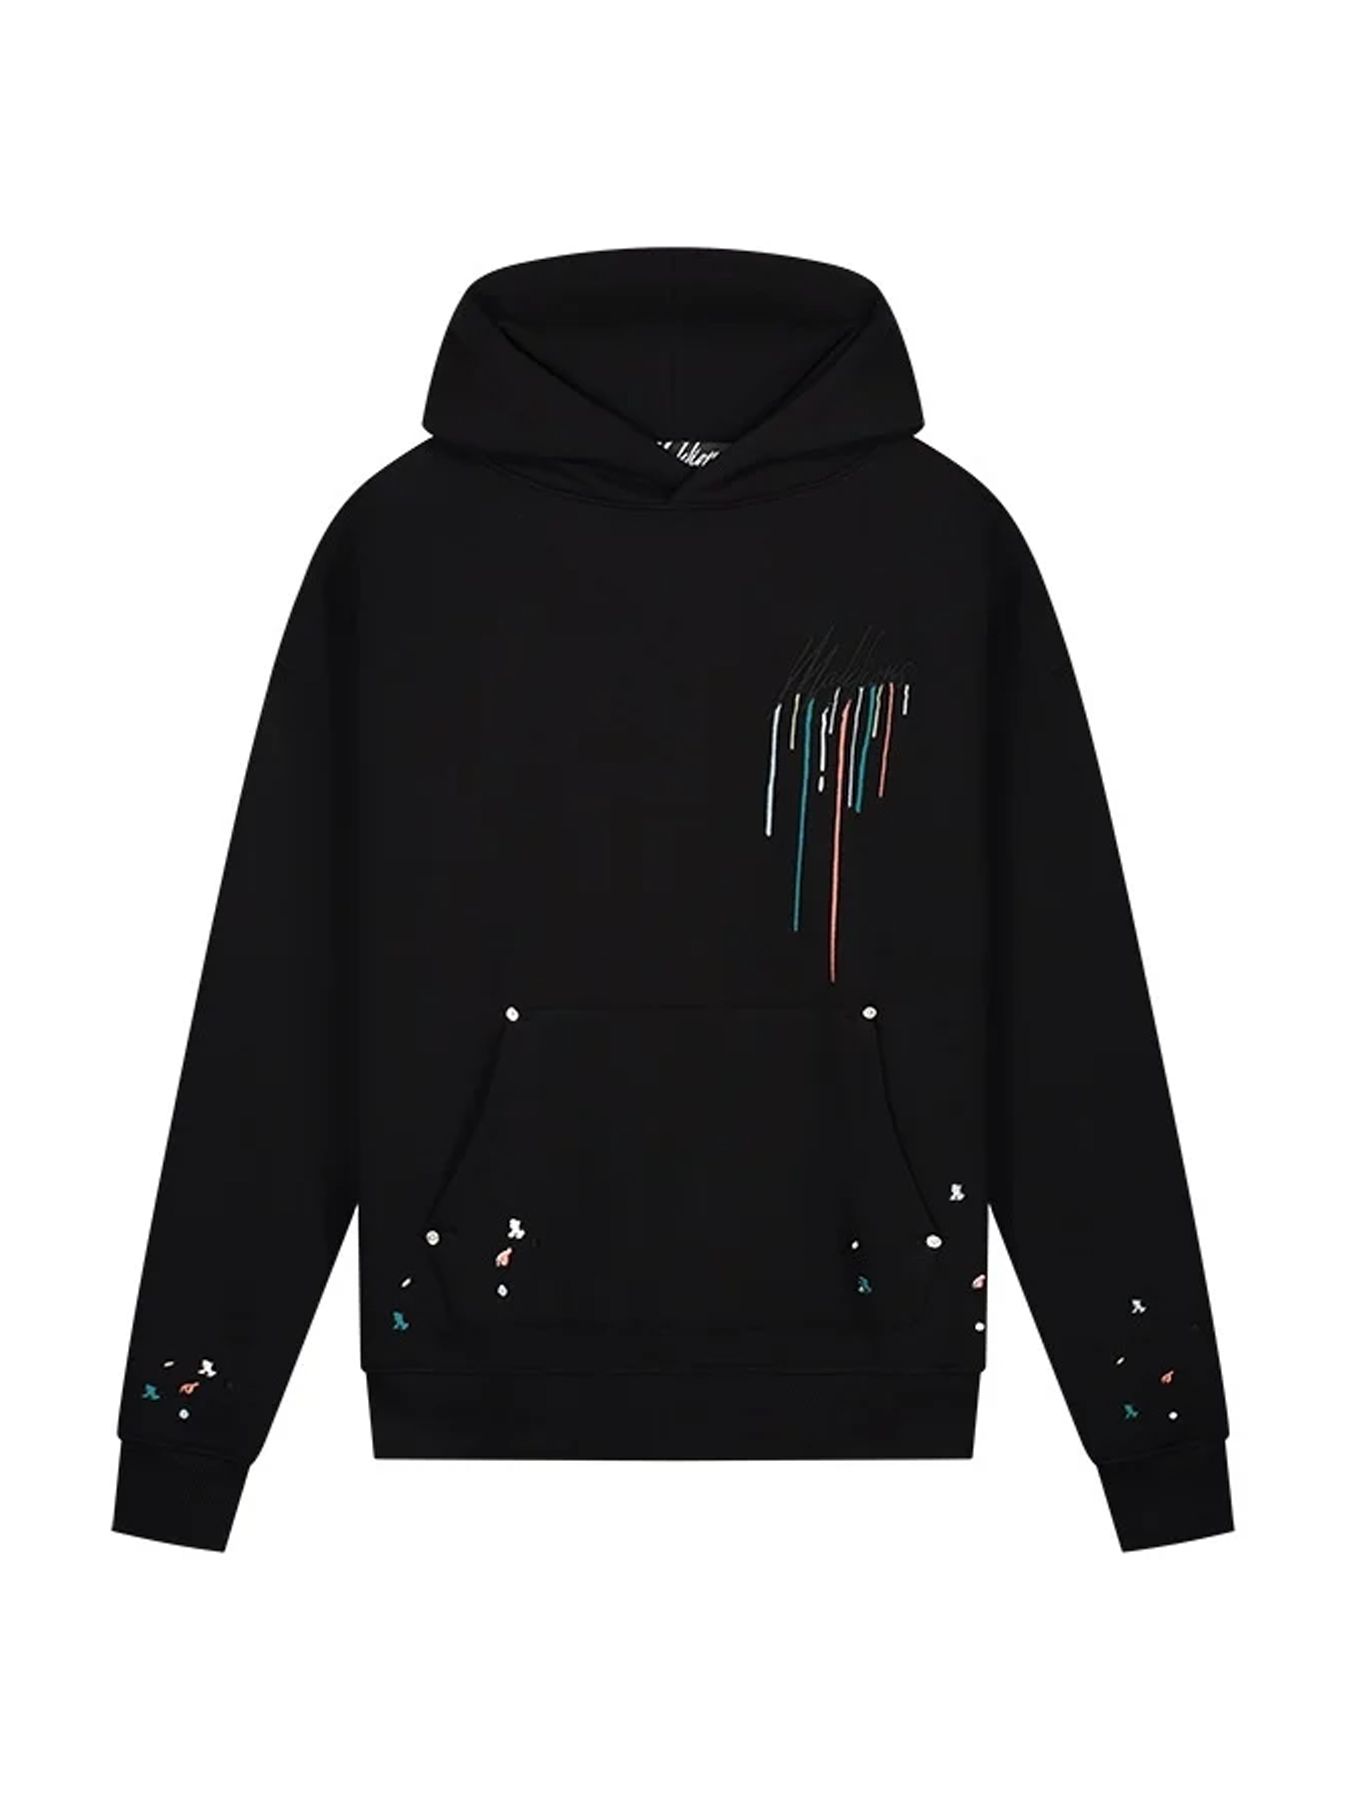 Malelions Mm1-Ps24-19 Hoodie 02A Black 2900145033063